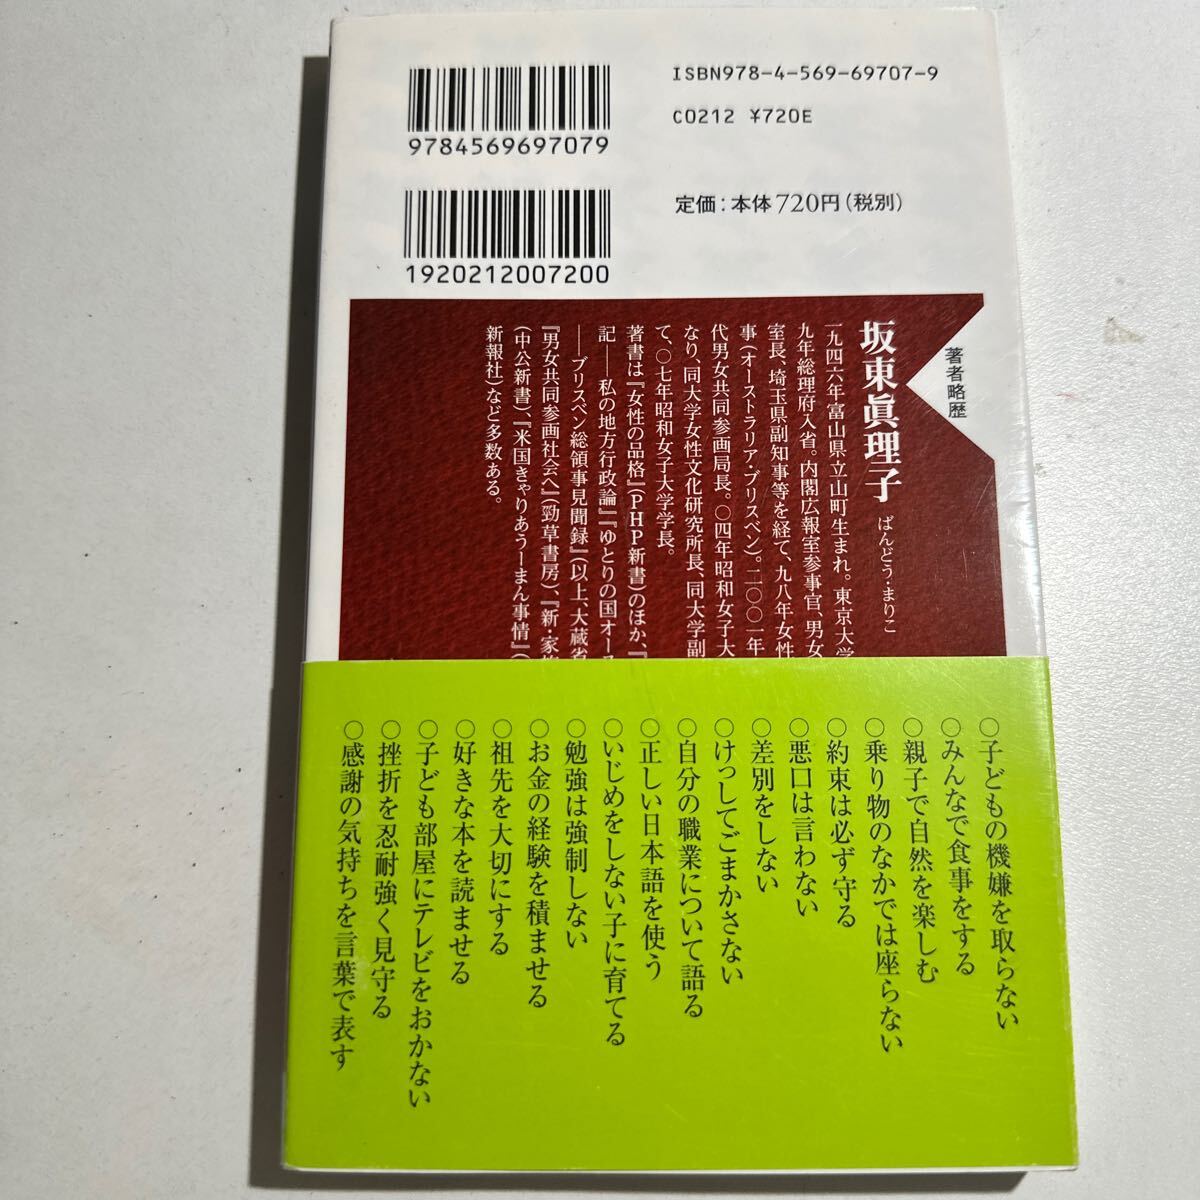 [ used ] parent. goods .(PHP new book 495) slope higashi genuine ..| work 